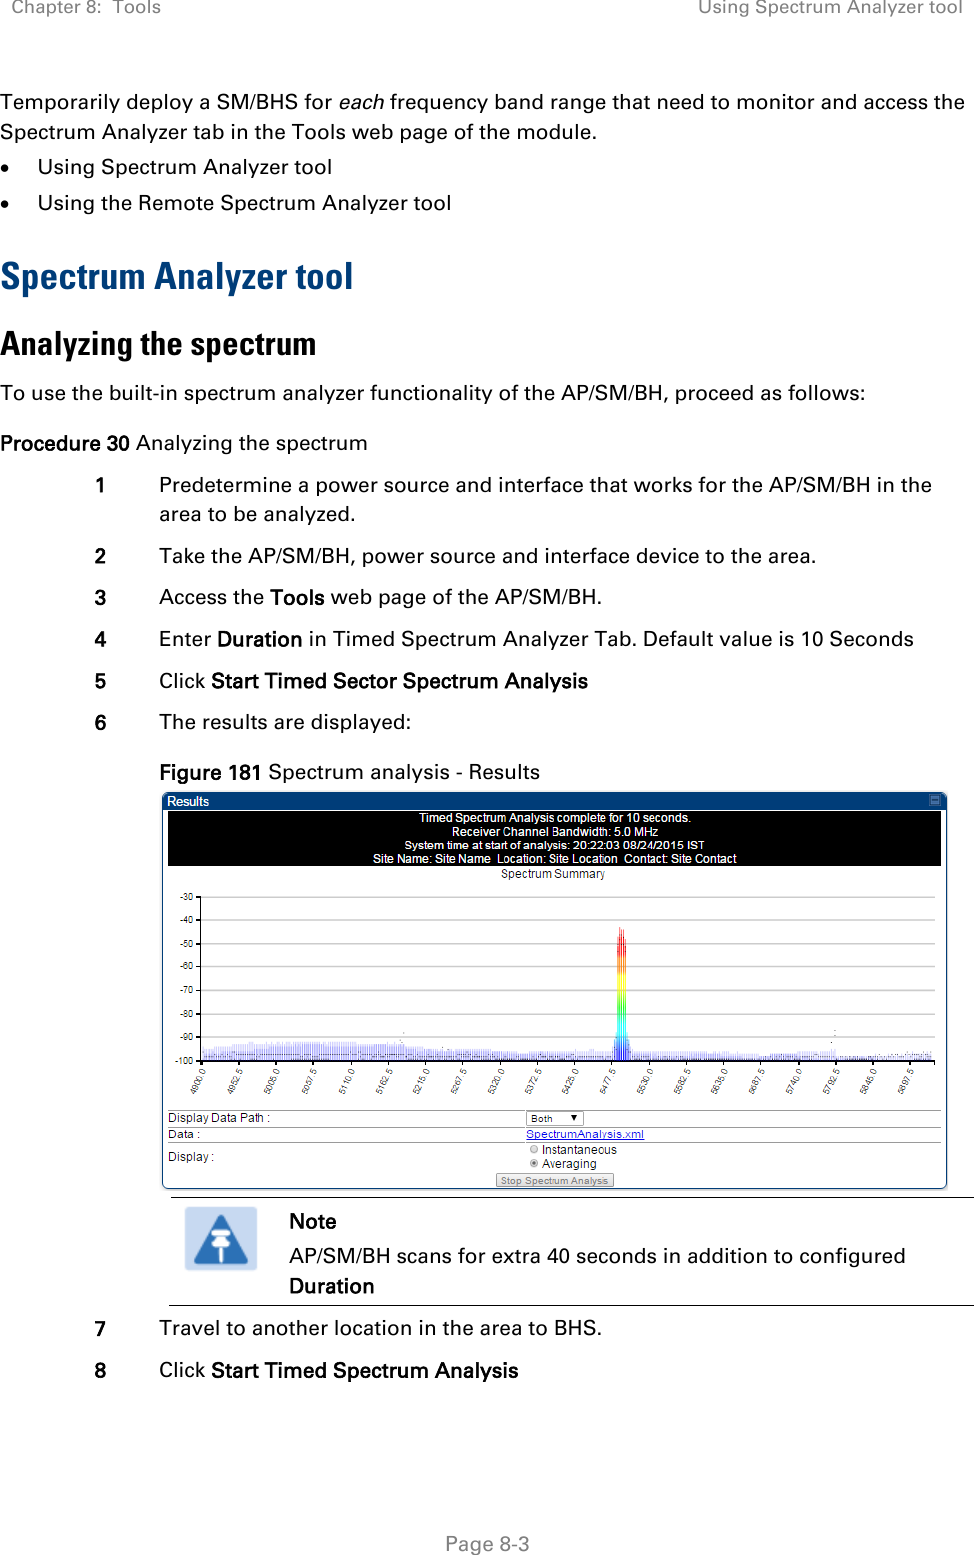 Chapter 8:  Tools Using Spectrum Analyzer tool   Page 8-3 Temporarily deploy a SM/BHS for each frequency band range that need to monitor and access the Spectrum Analyzer tab in the Tools web page of the module.  • Using Spectrum Analyzer tool • Using the Remote Spectrum Analyzer tool Spectrum Analyzer tool Analyzing the spectrum To use the built-in spectrum analyzer functionality of the AP/SM/BH, proceed as follows: Procedure 30 Analyzing the spectrum 1 Predetermine a power source and interface that works for the AP/SM/BH in the area to be analyzed. 2 Take the AP/SM/BH, power source and interface device to the area. 3 Access the Tools web page of the AP/SM/BH. 4 Enter Duration in Timed Spectrum Analyzer Tab. Default value is 10 Seconds 5 Click Start Timed Sector Spectrum Analysis 6 The results are displayed: Figure 181 Spectrum analysis - Results   Note AP/SM/BH scans for extra 40 seconds in addition to configured Duration  7 Travel to another location in the area to BHS. 8 Click Start Timed Spectrum Analysis 